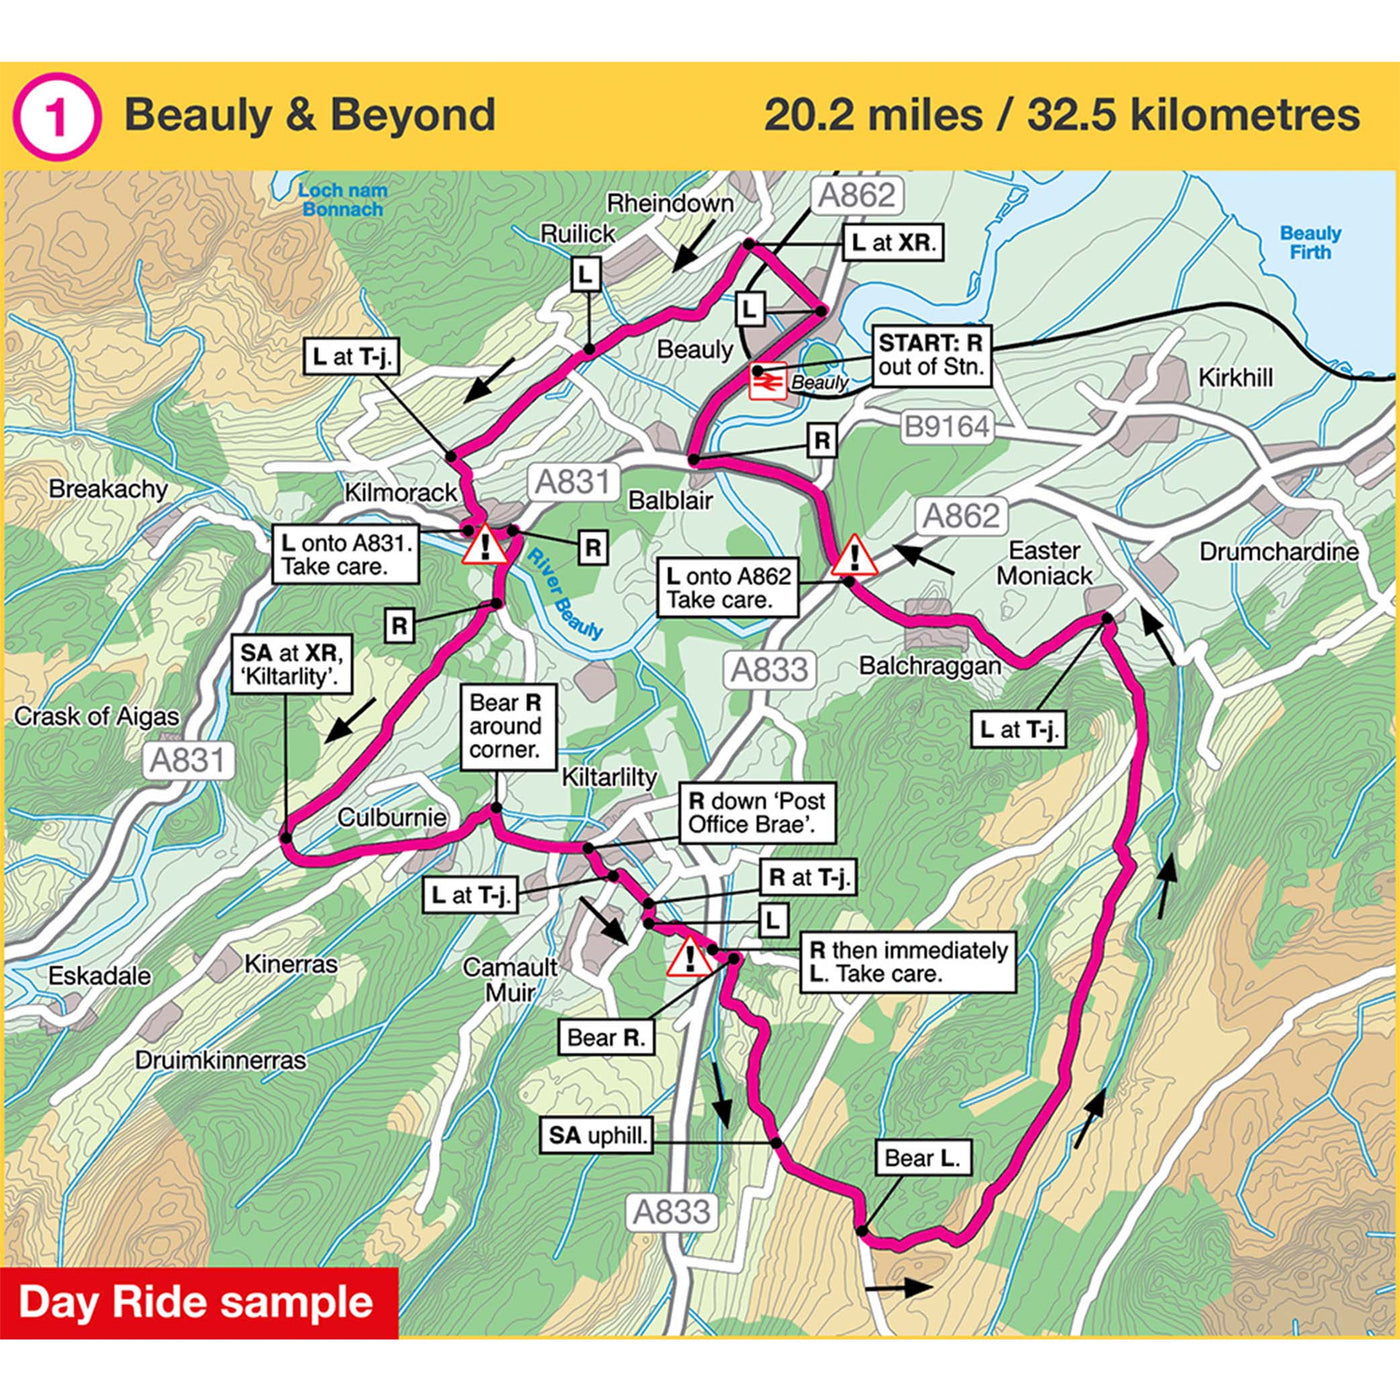 Day ride sample: Beauly and Beyond, 20.2 miles